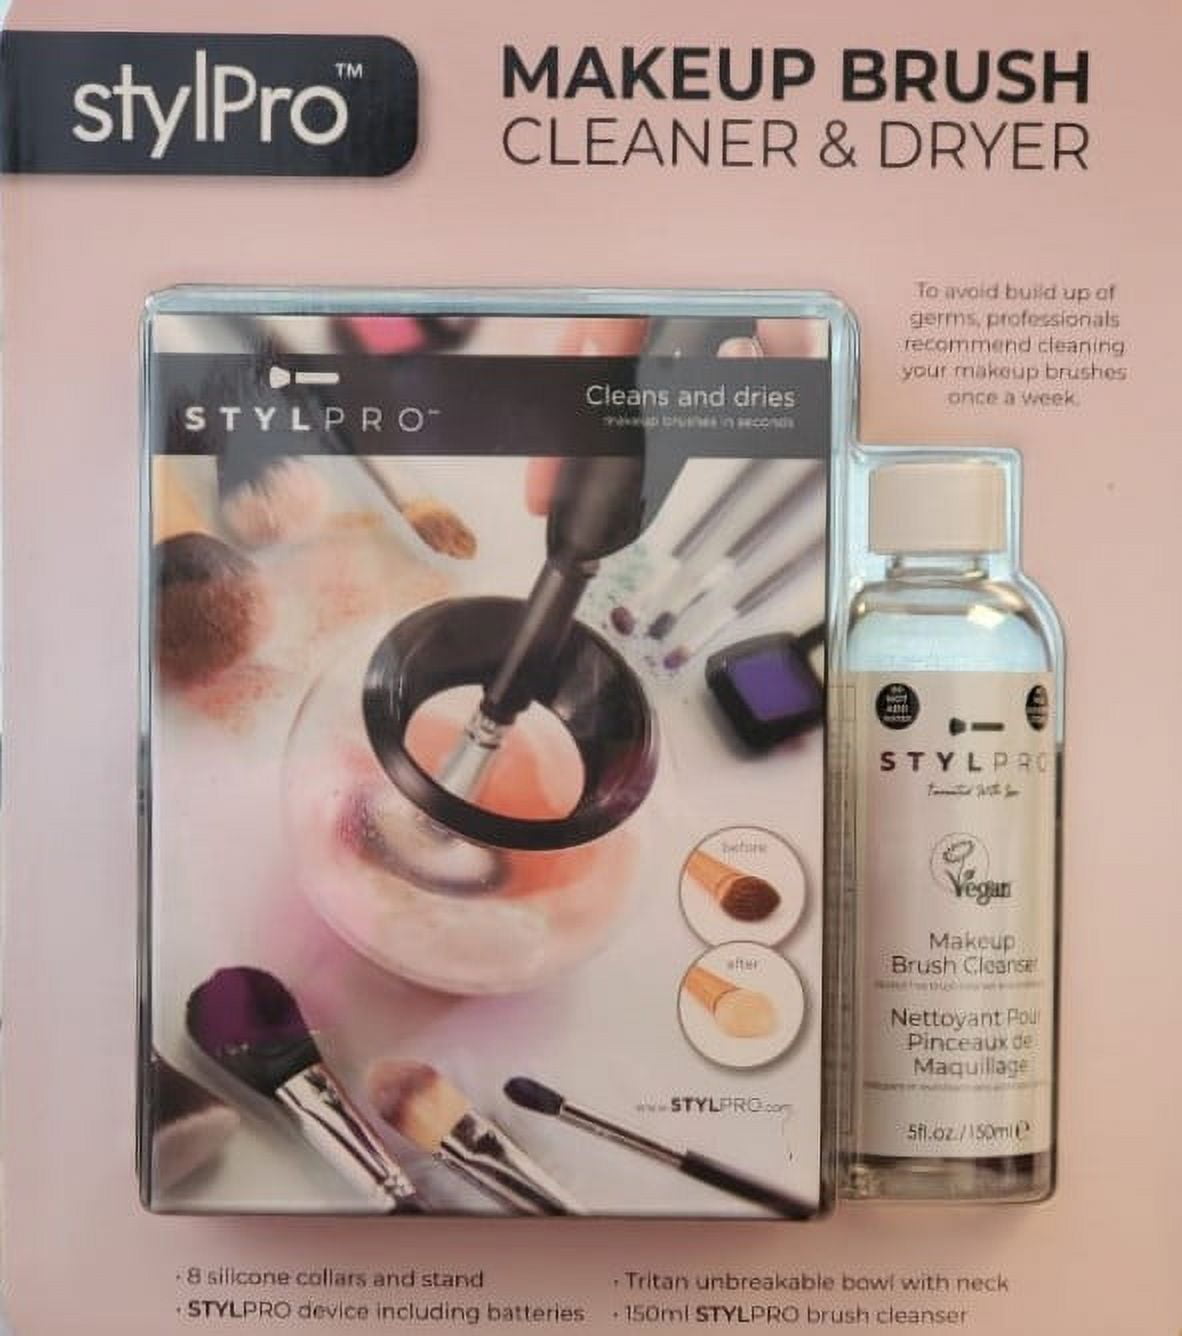 Stylpro Makeup Brush Cleaner & Dryer (5 fl oz)